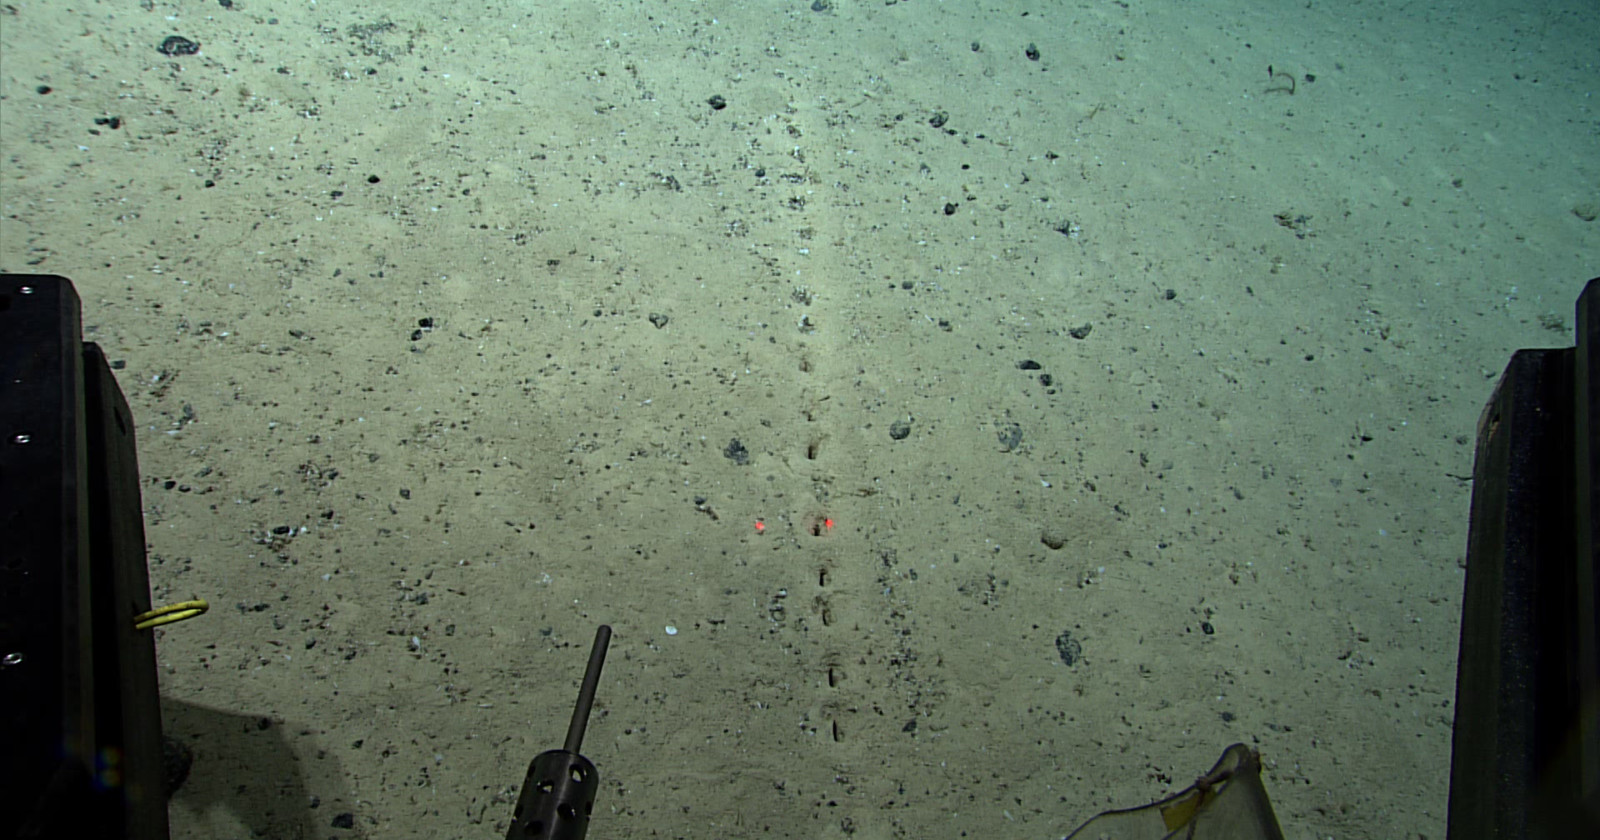 Scientists Baffled by Strange Holes on Seafloor That Look Human-Made